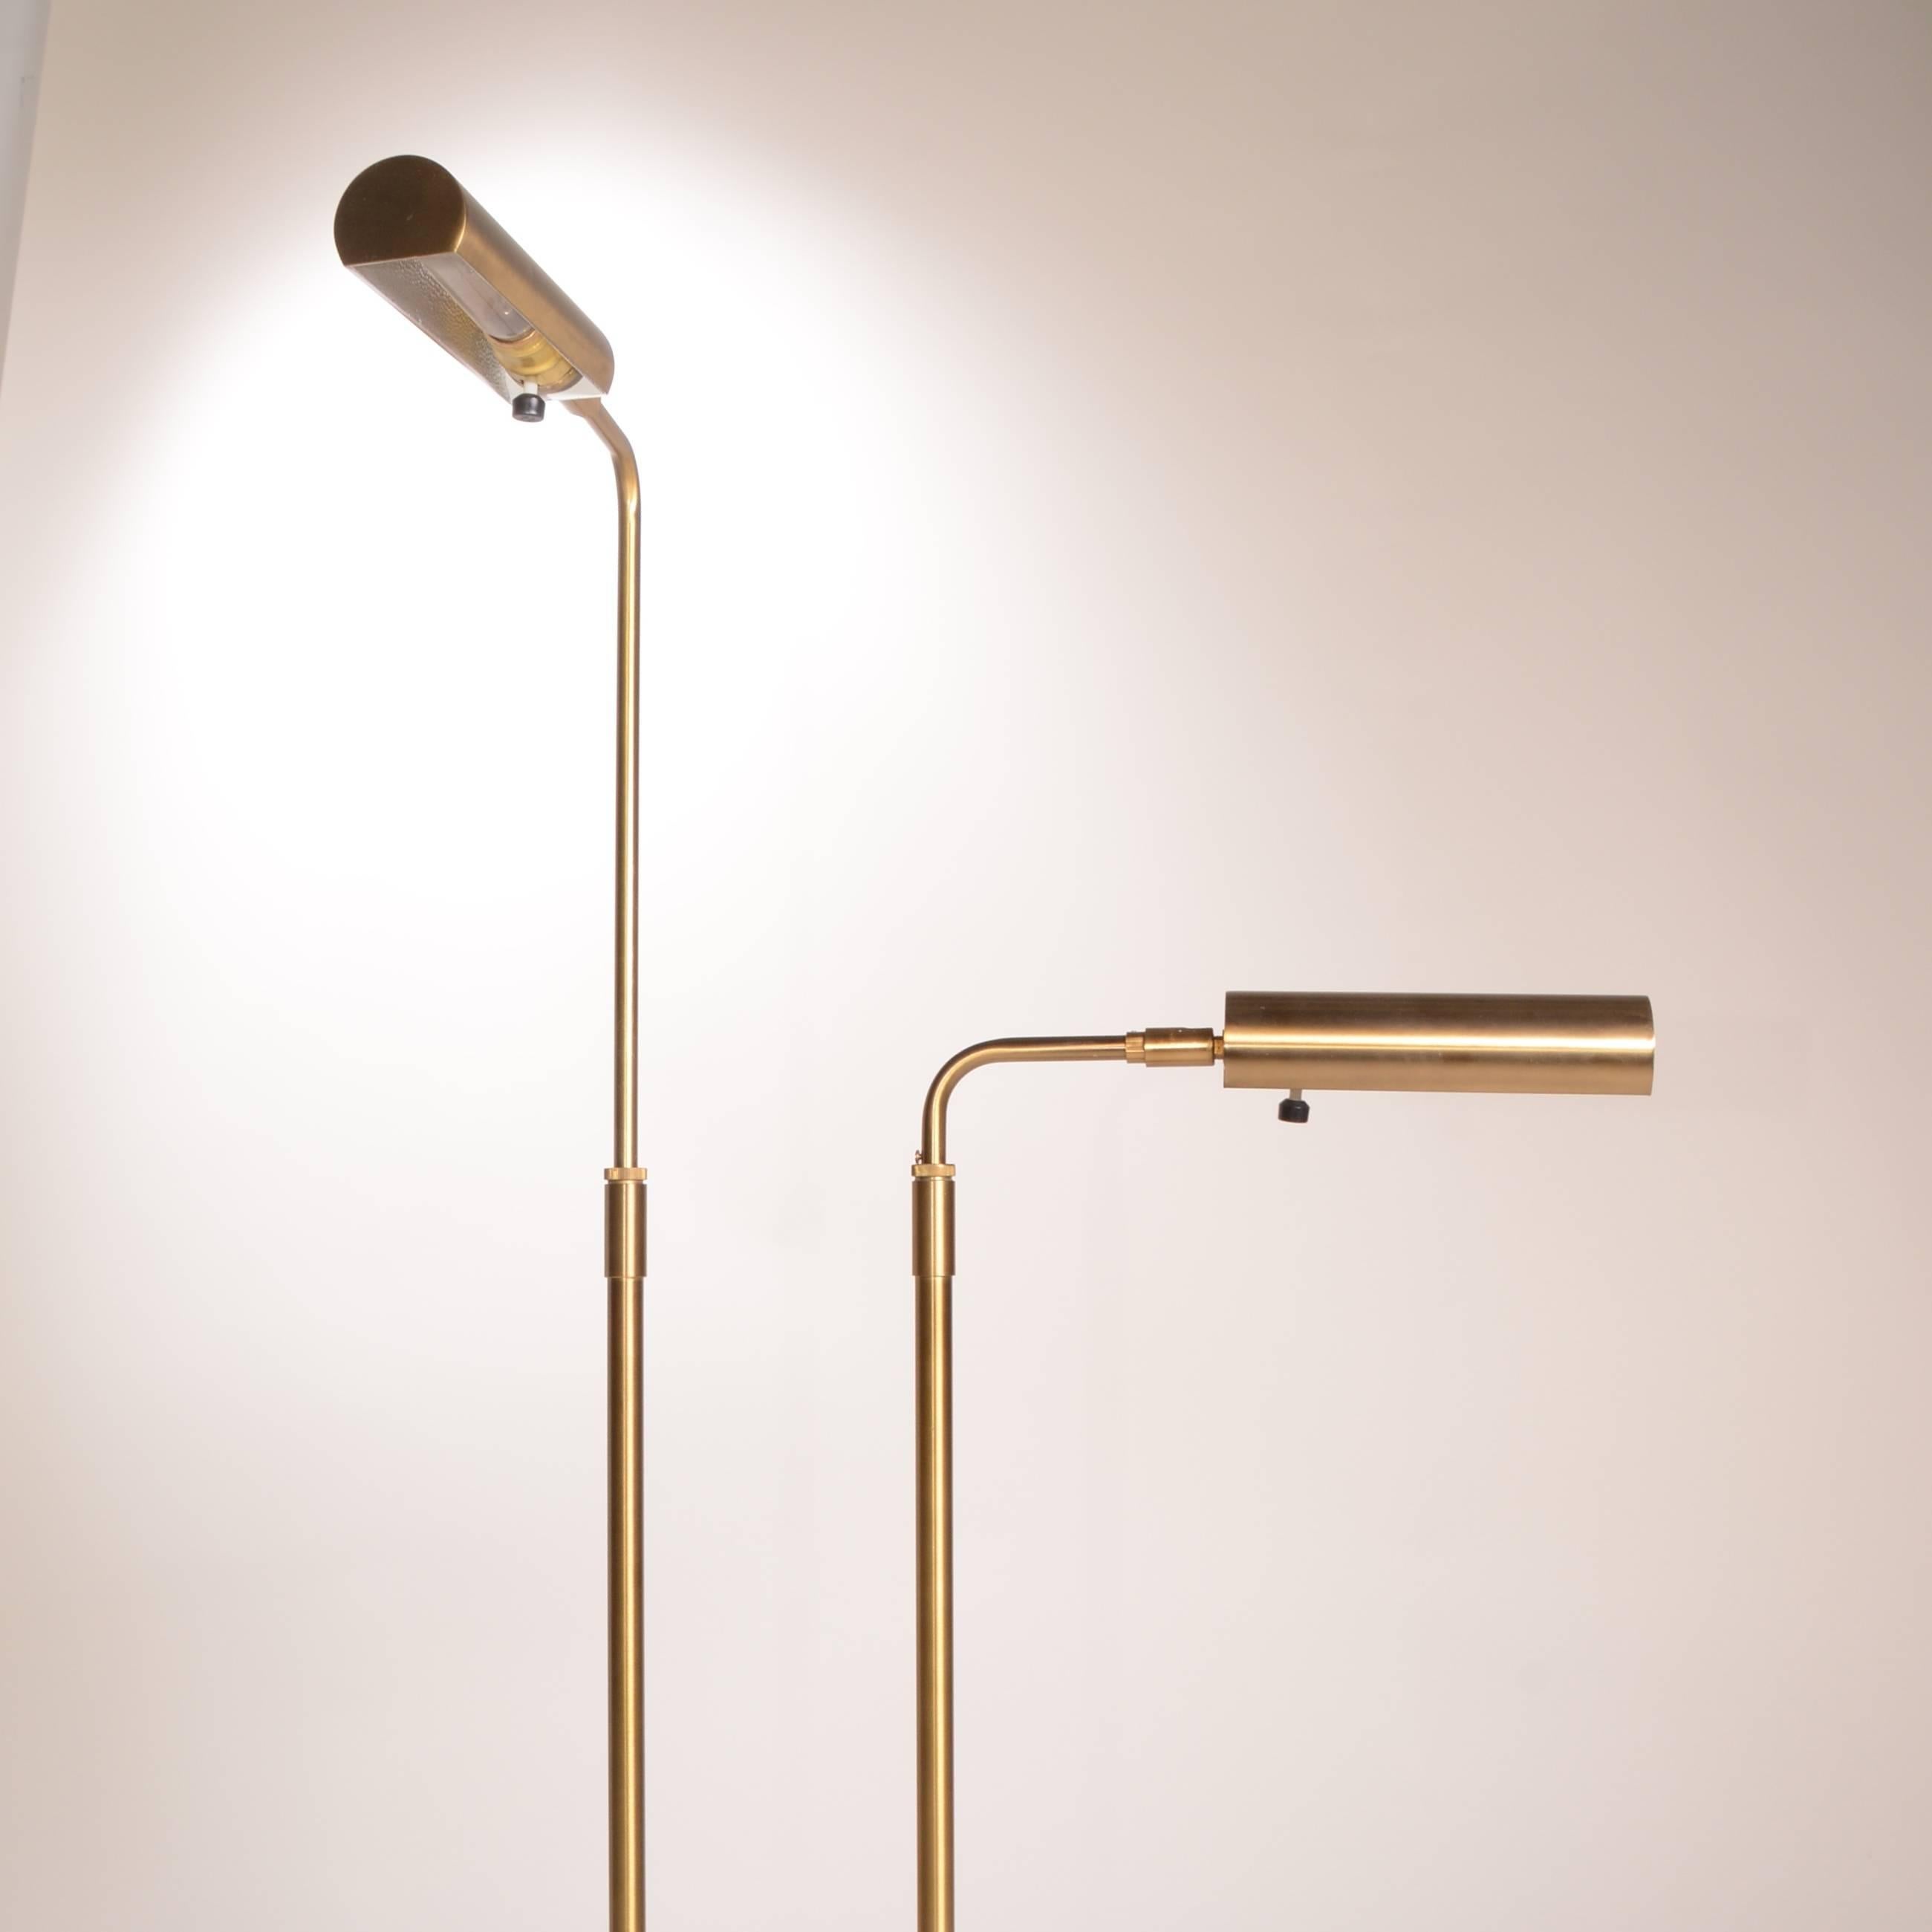 Pair of Flawless Koch & Lowy Reading Floor Lamps in Brushed Brass 1